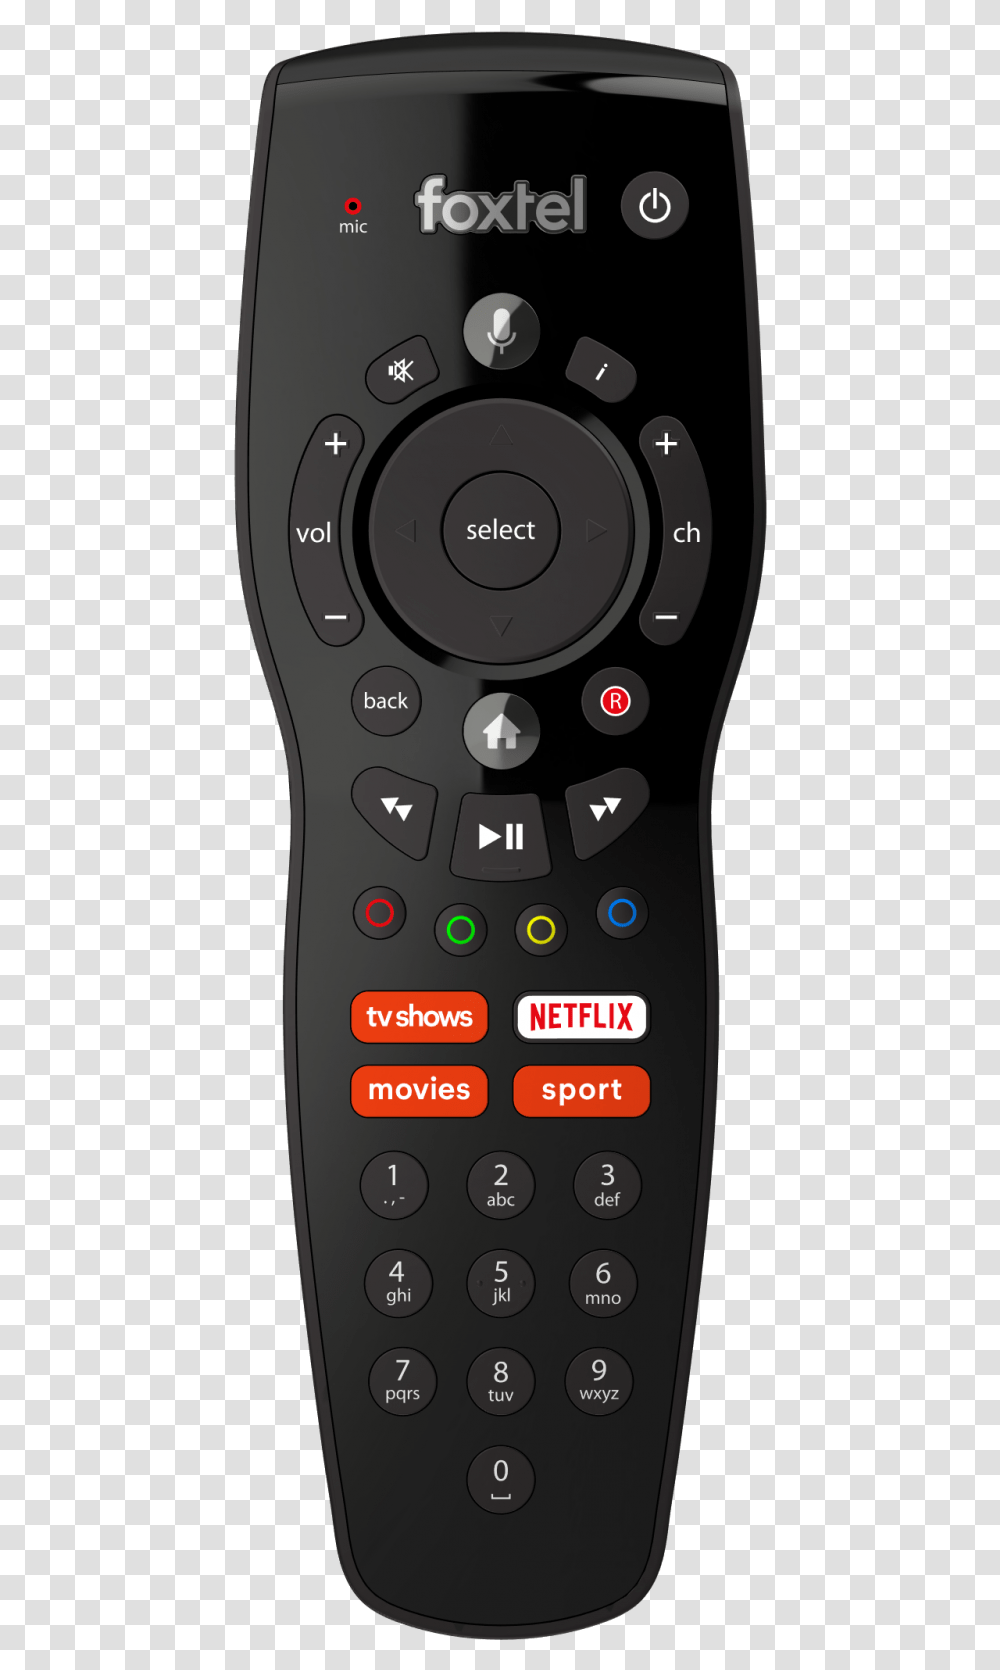 Front New Foxtel Iq4 Remote, Electronics, Remote Control, Mobile Phone, Cell Phone Transparent Png